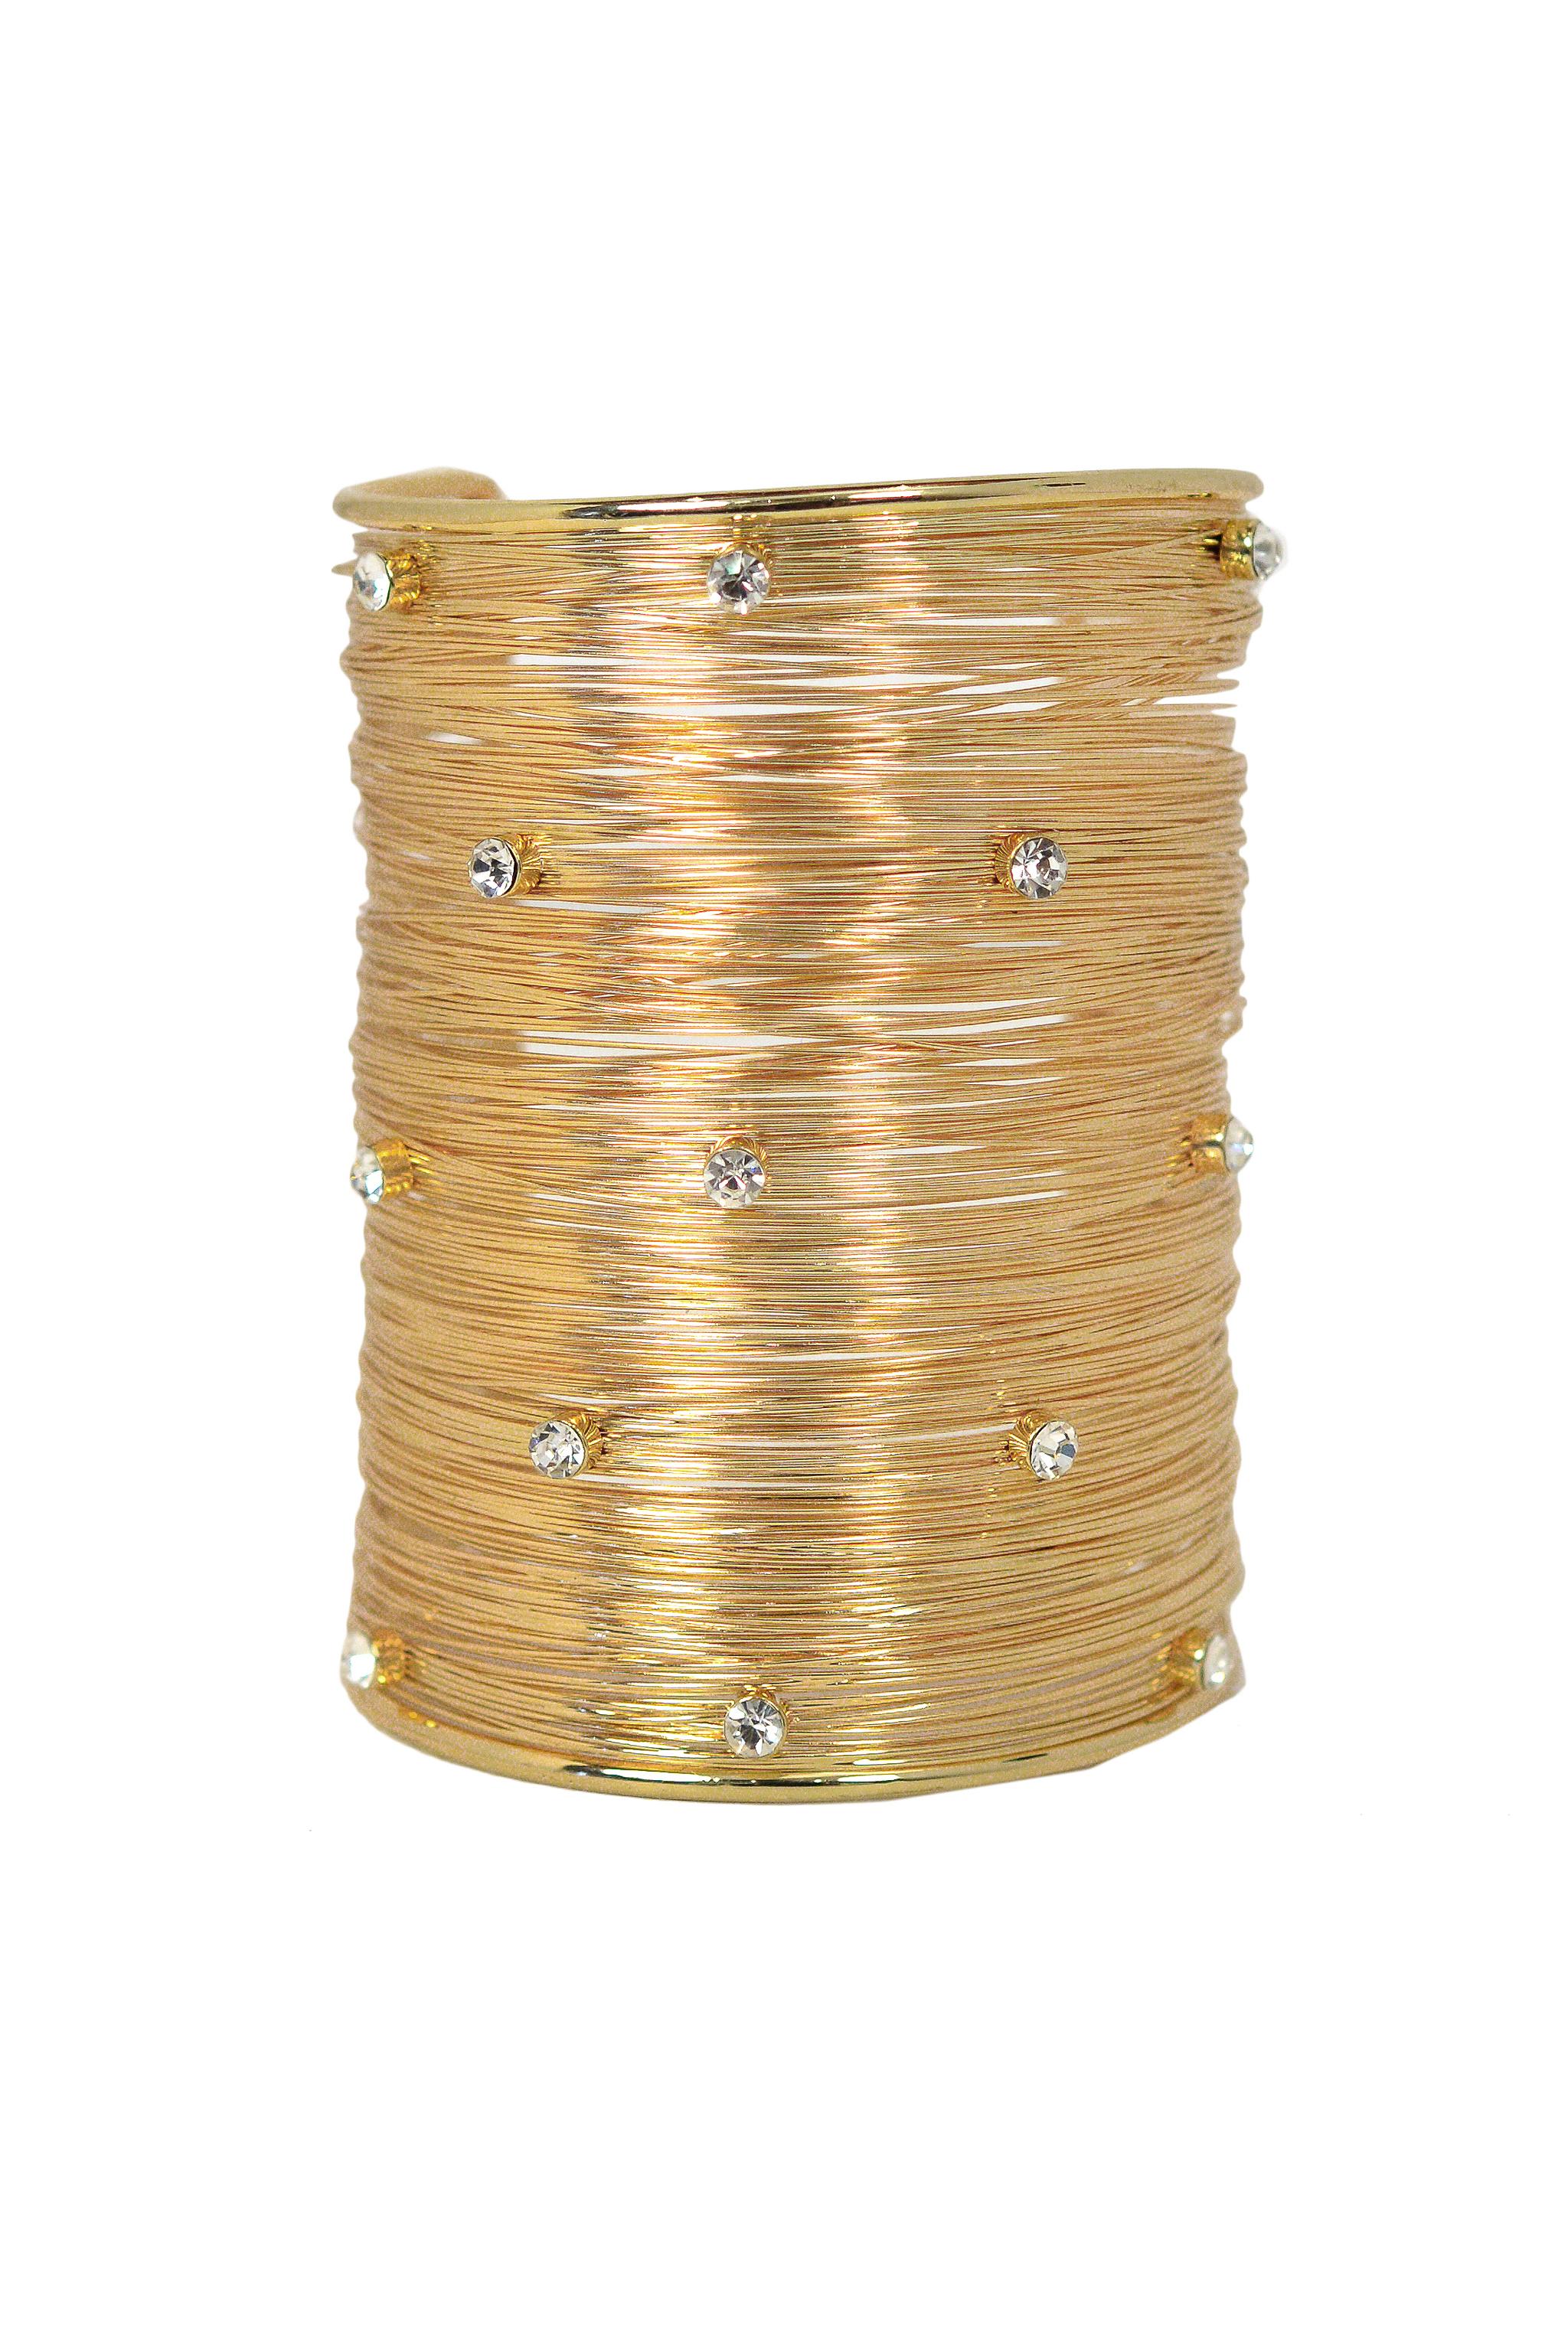 Resurrection Vintage is excited to offer a pair of vintage Ugo Correani set of gold-tone multi-wire cuffs adorned with clear crystal studs.

Ugo Correani
One Size
Metal Wire
Excellent Vintage Condition
Authenticity Guaranteed